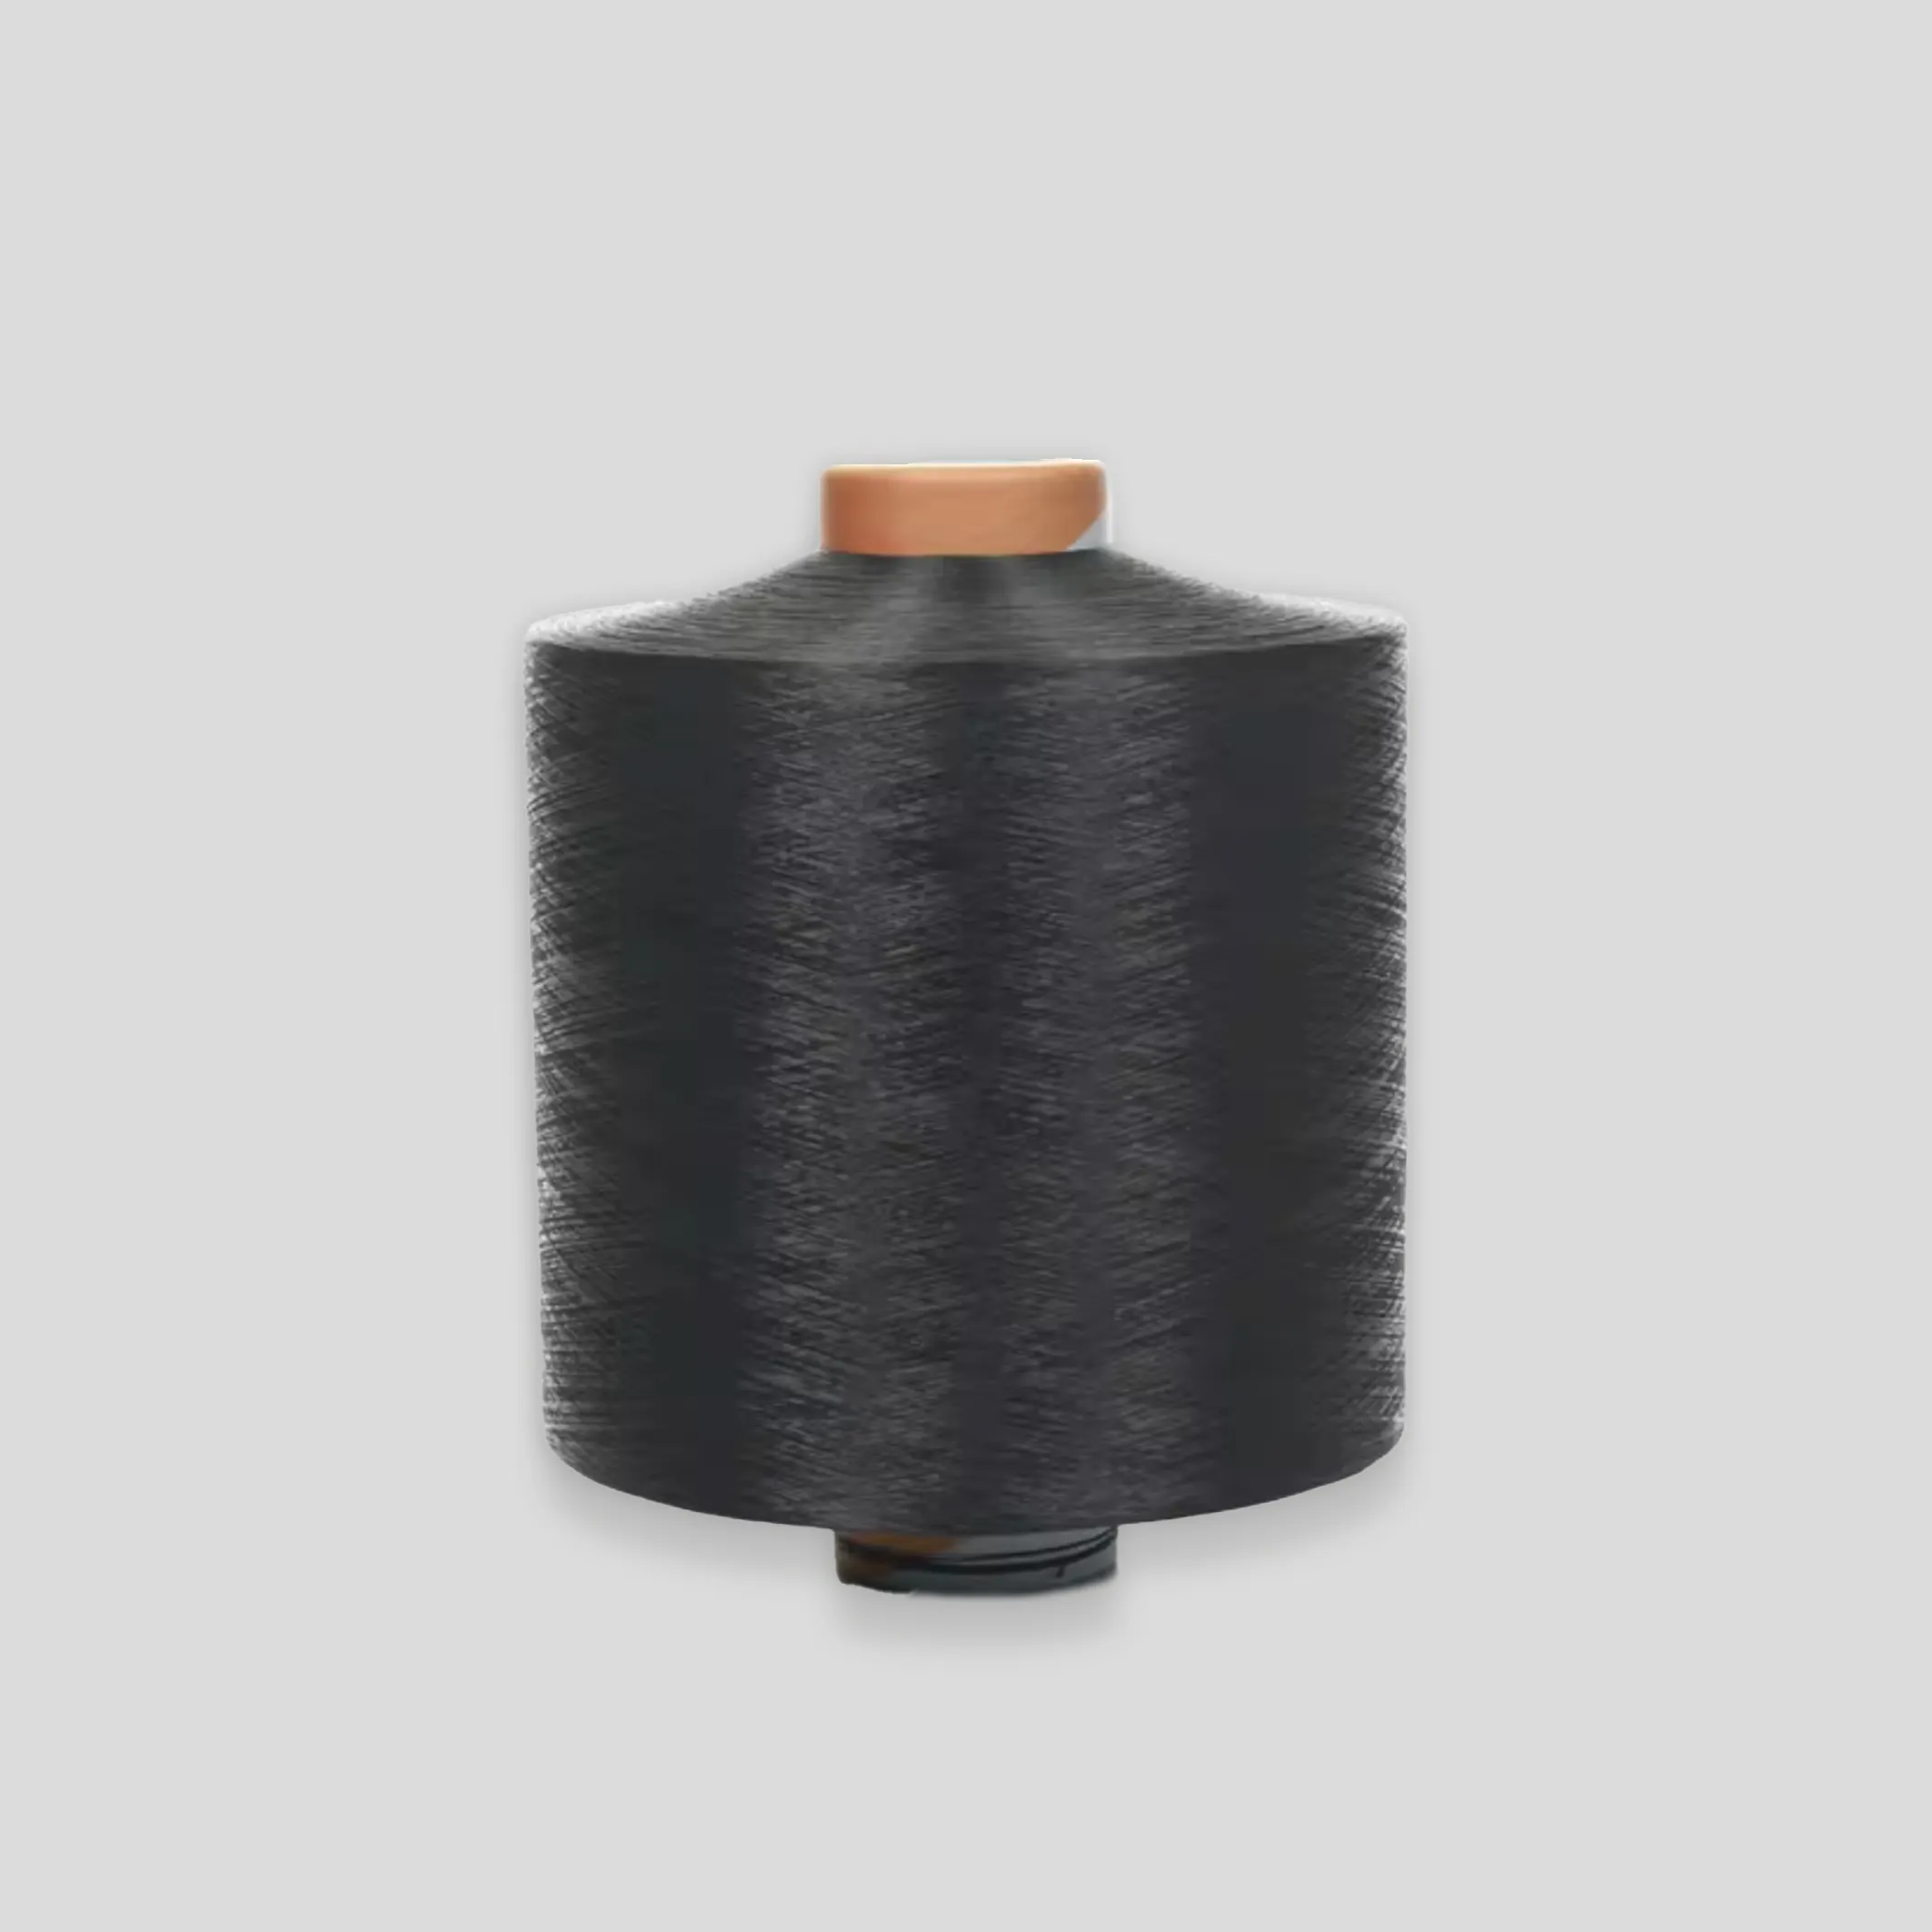 Hangzhou Manufacture Wholesale SIM Polyester Textured Yarn 300D/96F DTY Dope Dyed Black High Strength 100% Polyester Raw Pattern